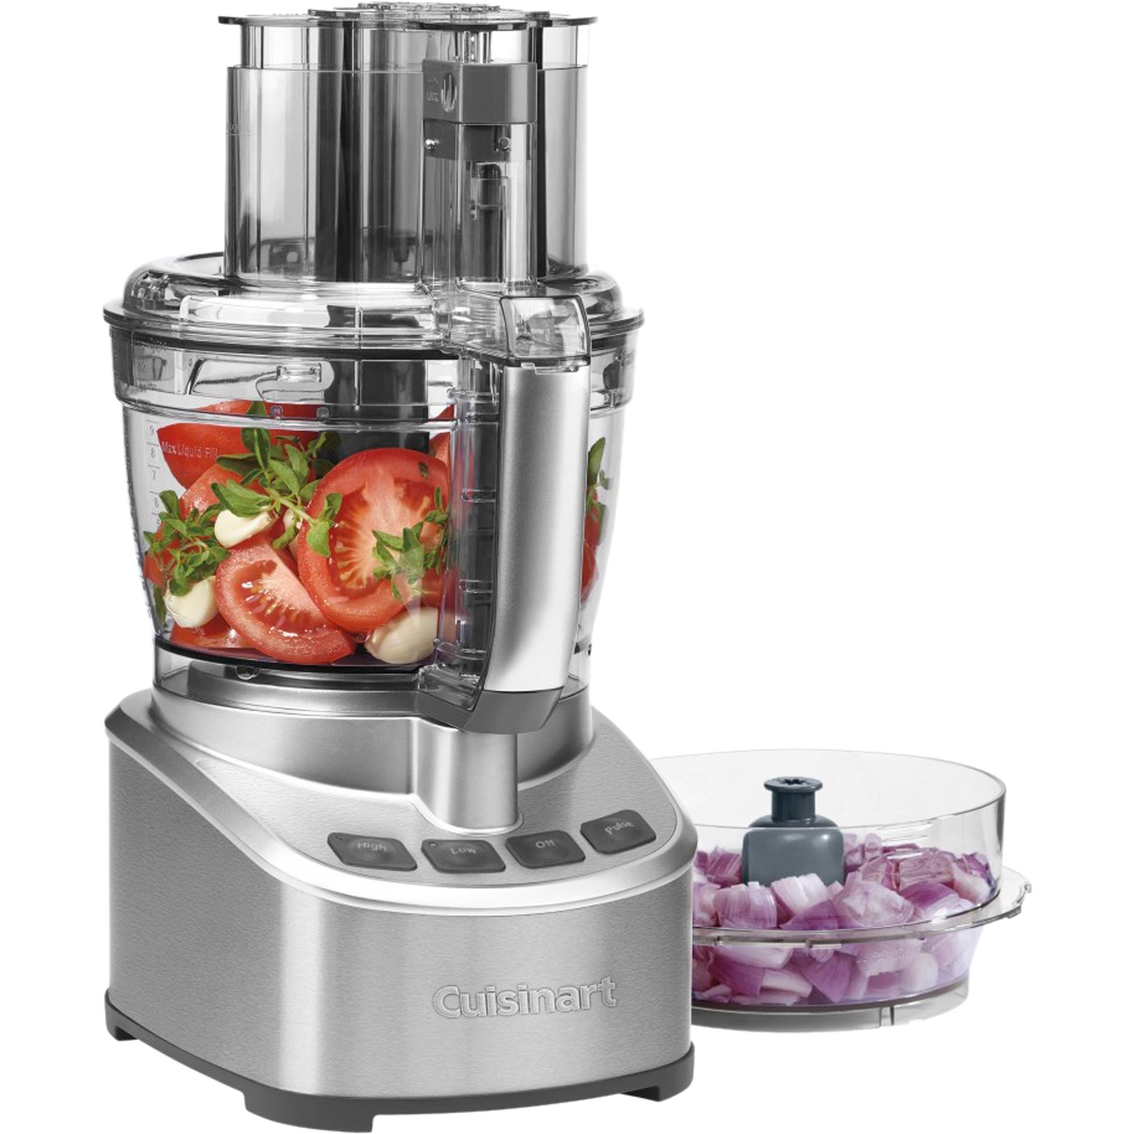 Cuisinart Elemental 8 Cup Food Processor with BladeLock System in